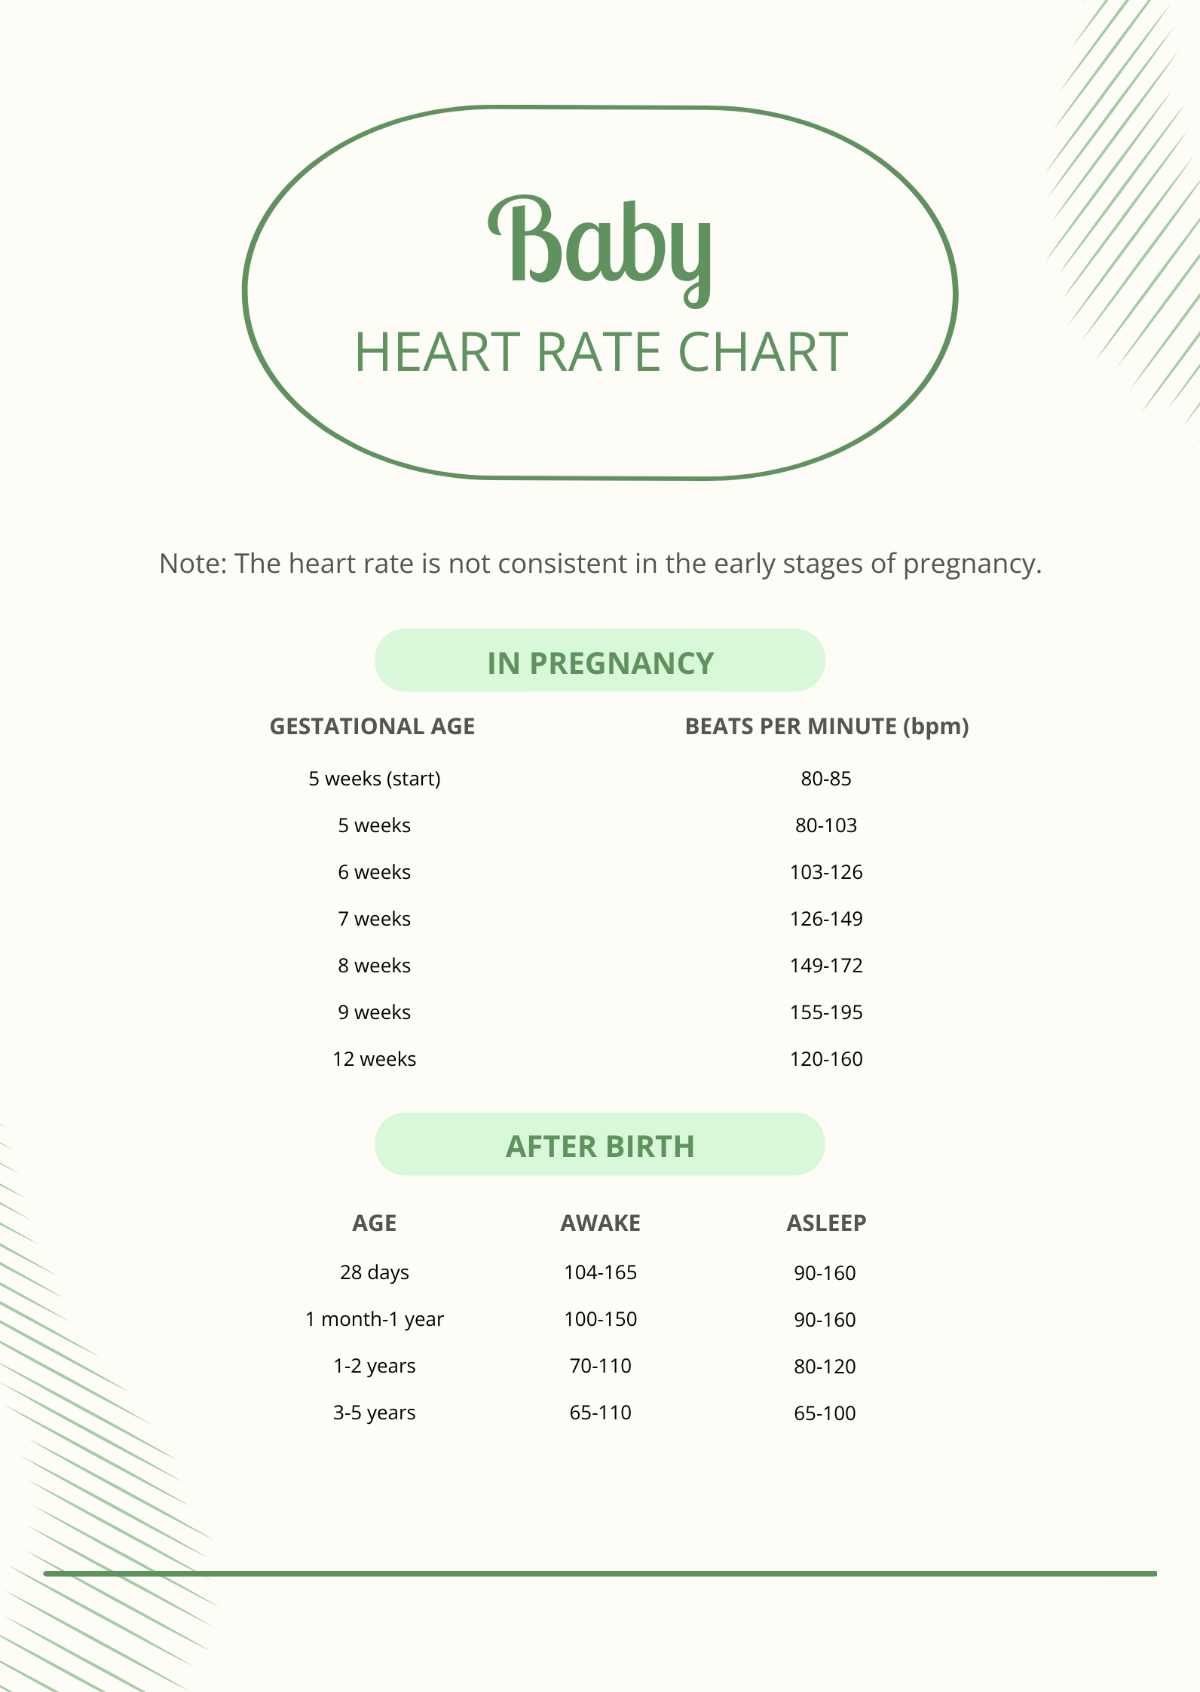 Baby Heart Rate Chart